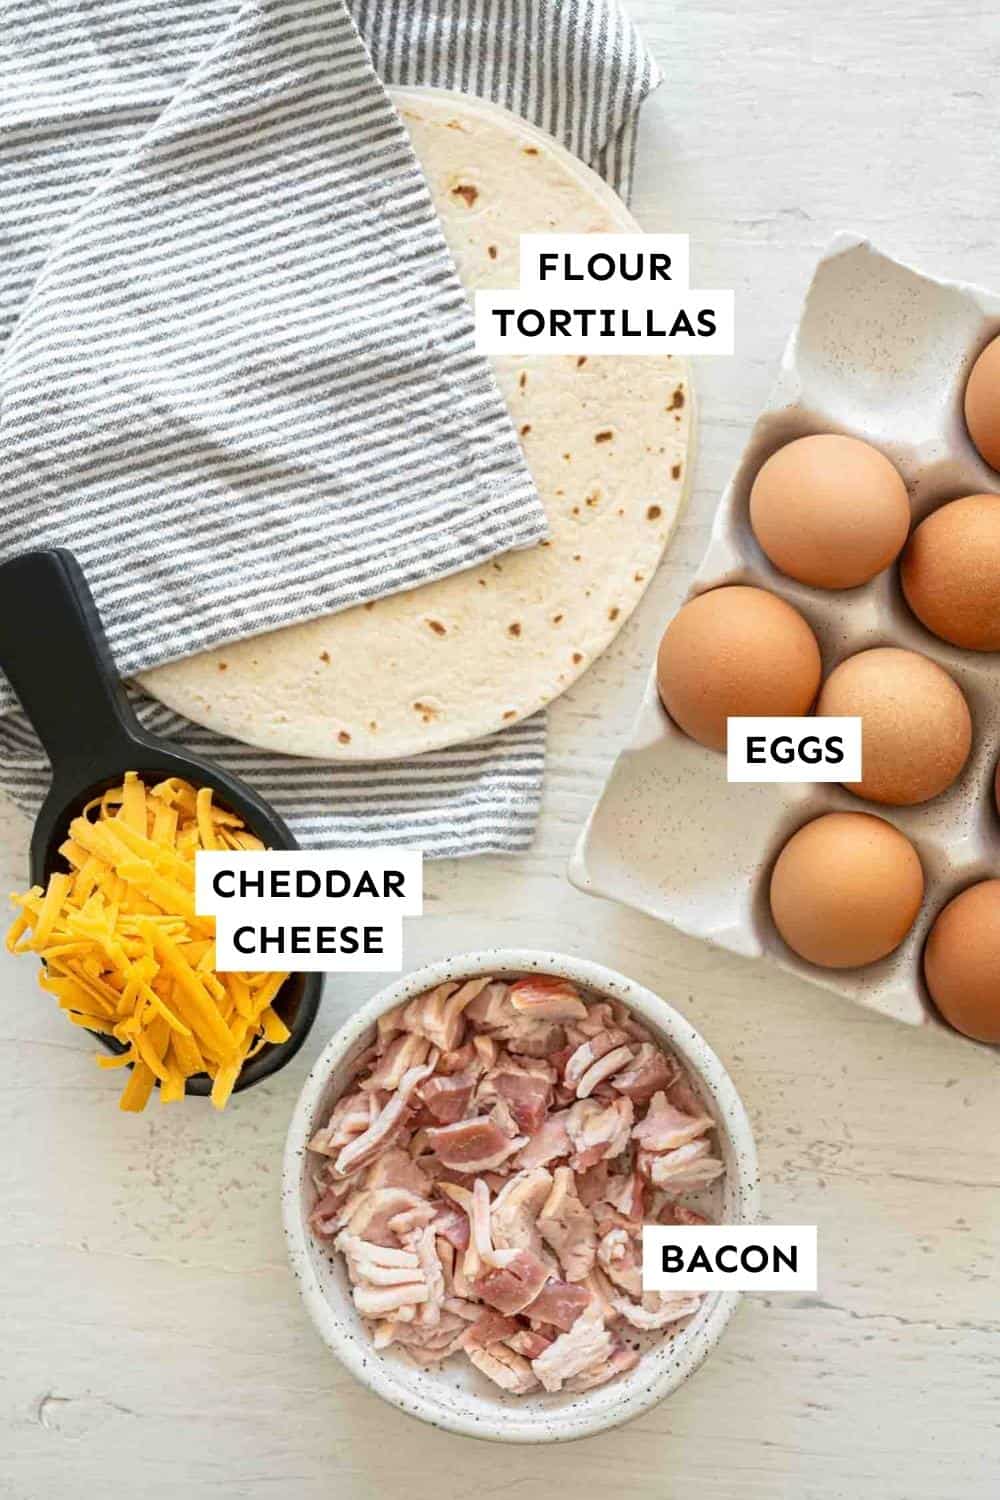 Ingredients laid out for Breakfast Quesadilla.